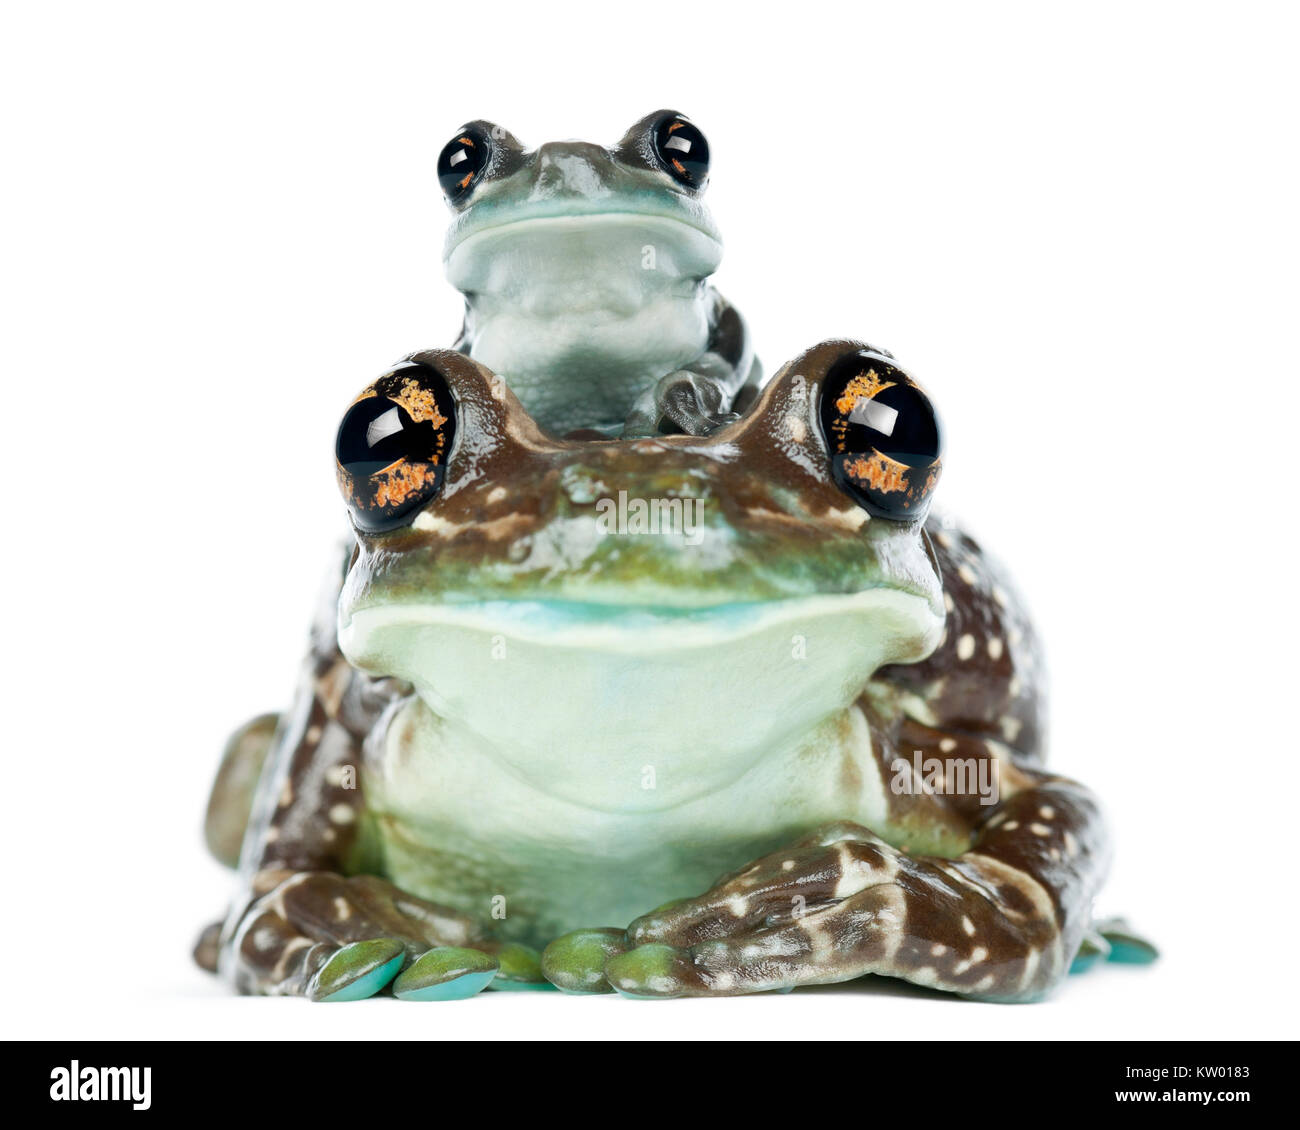 Female Amazon Milk Frog with young, Trachycephalus resinifictrix, portrait against white background Stock Photo